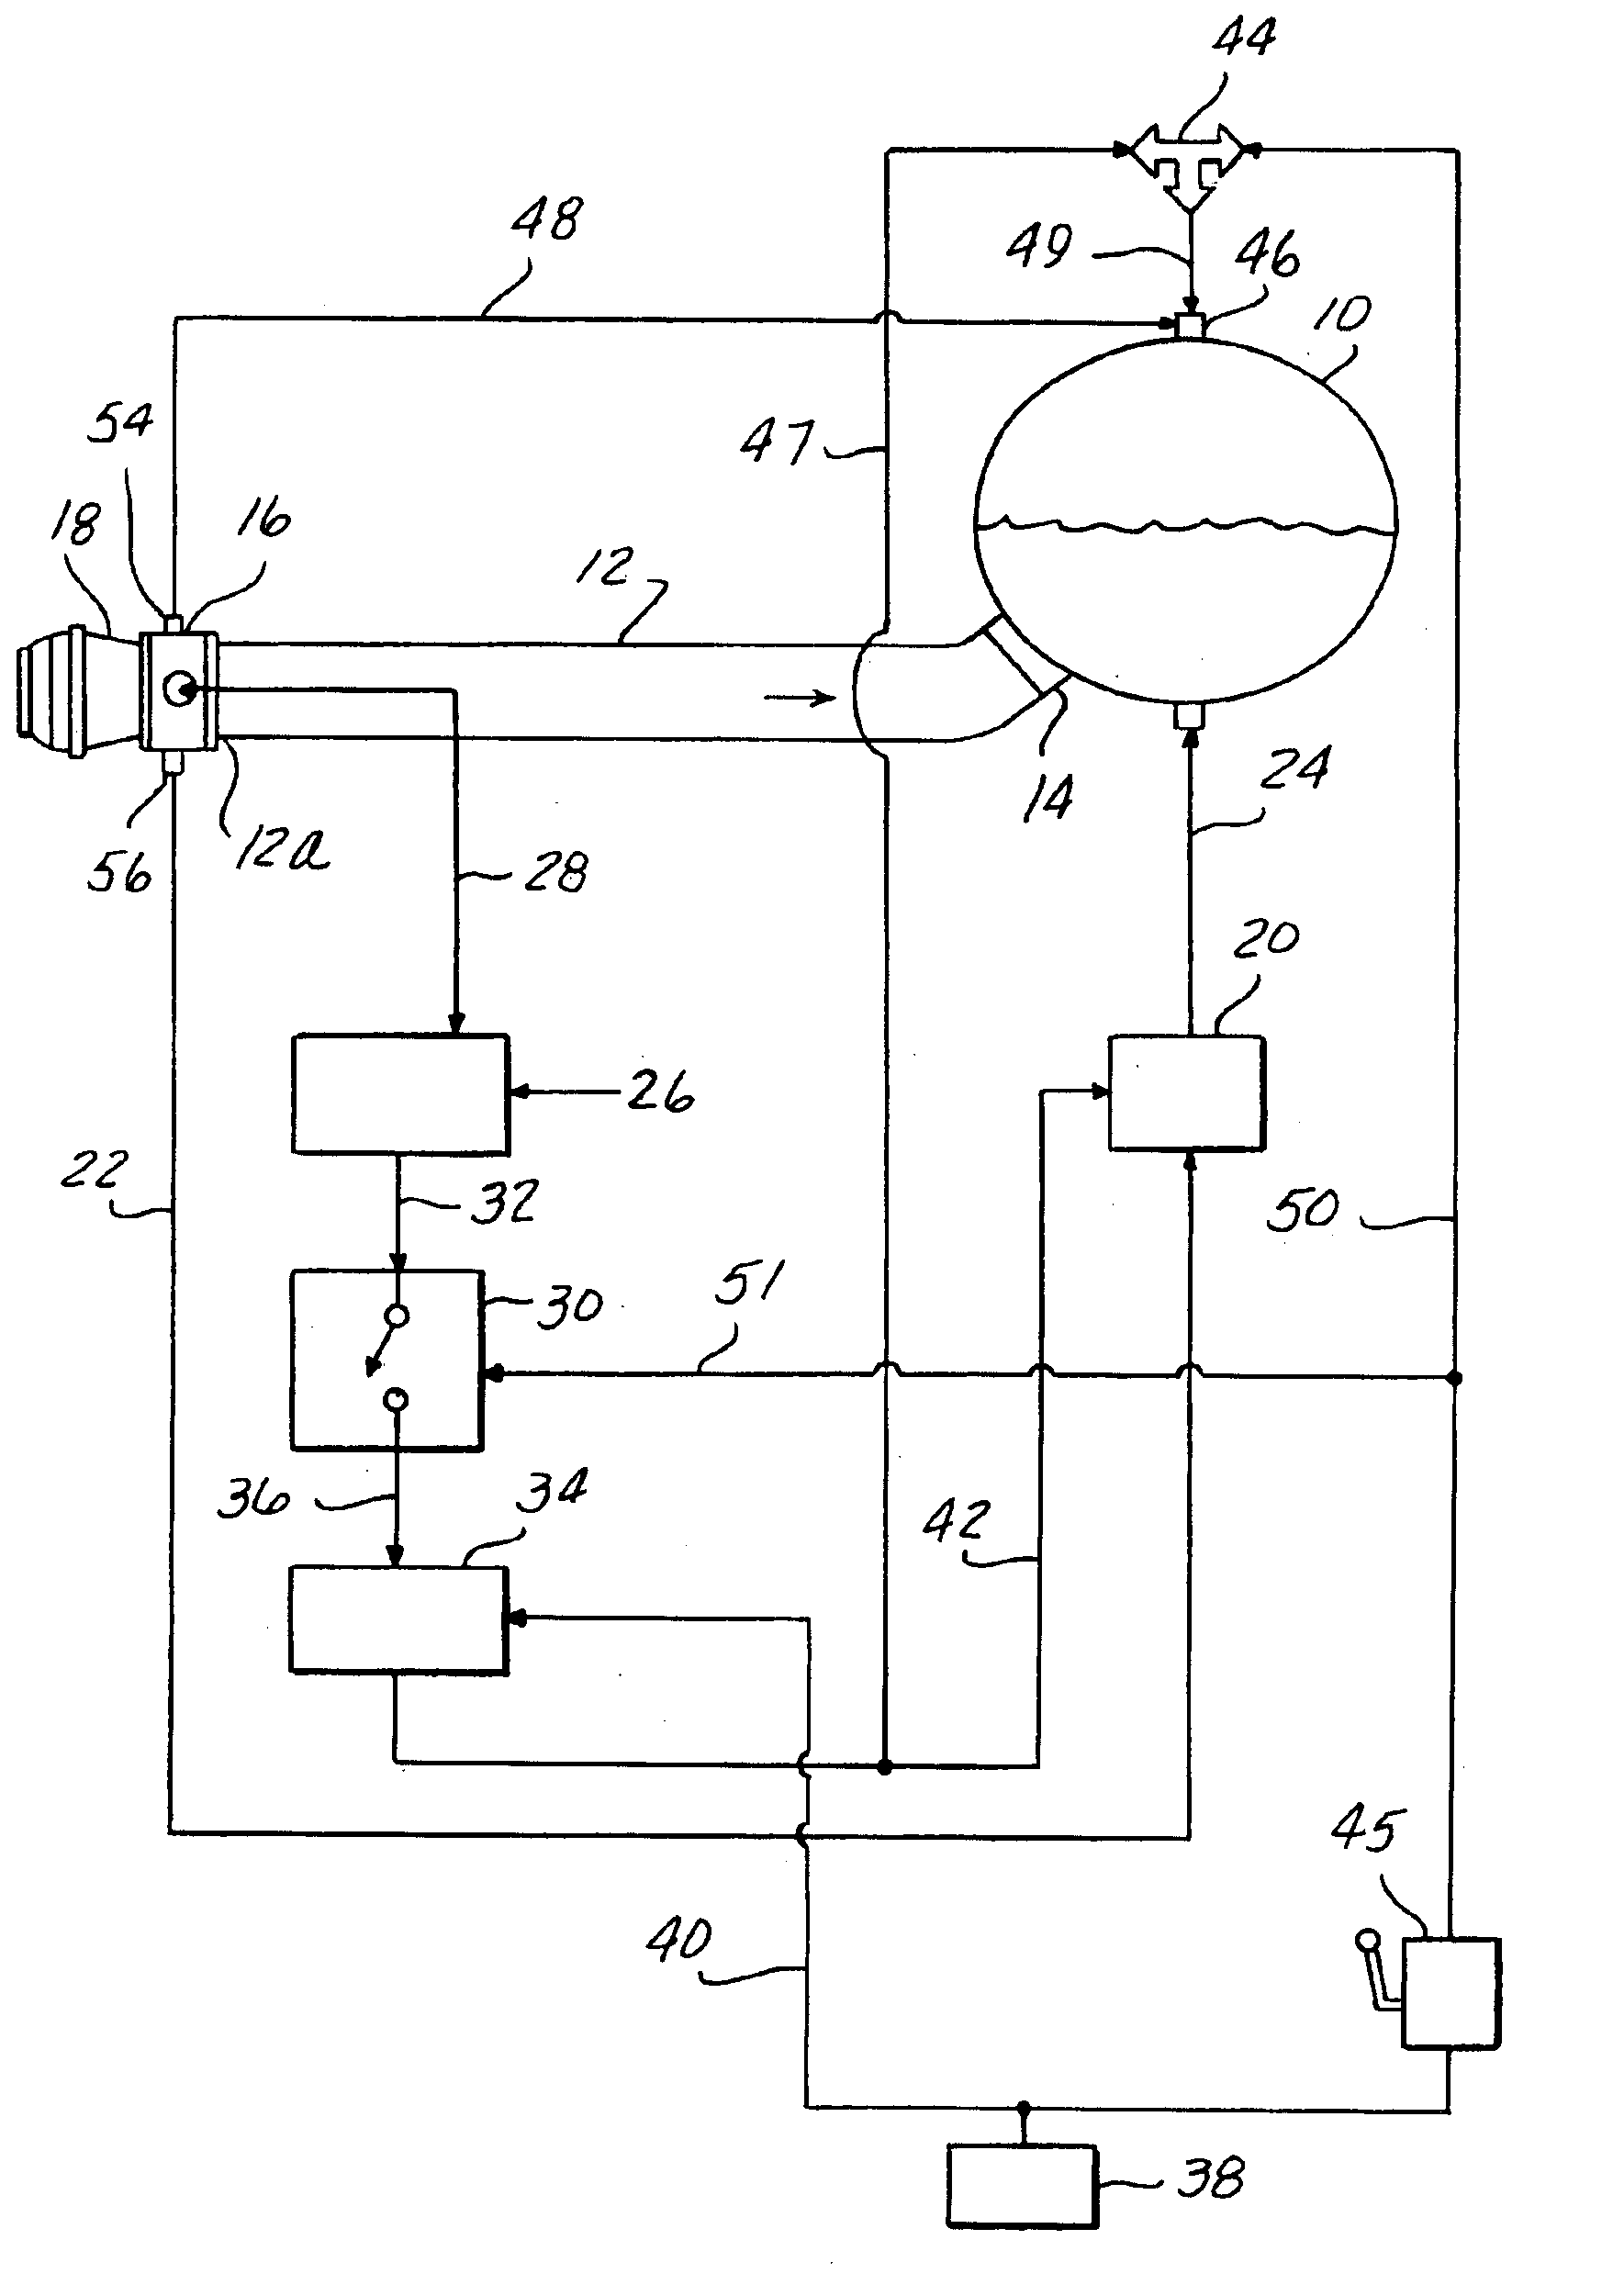 Method and apparatus for removing hazardous liquid from petroleum tanker trailer delivery/loading piping